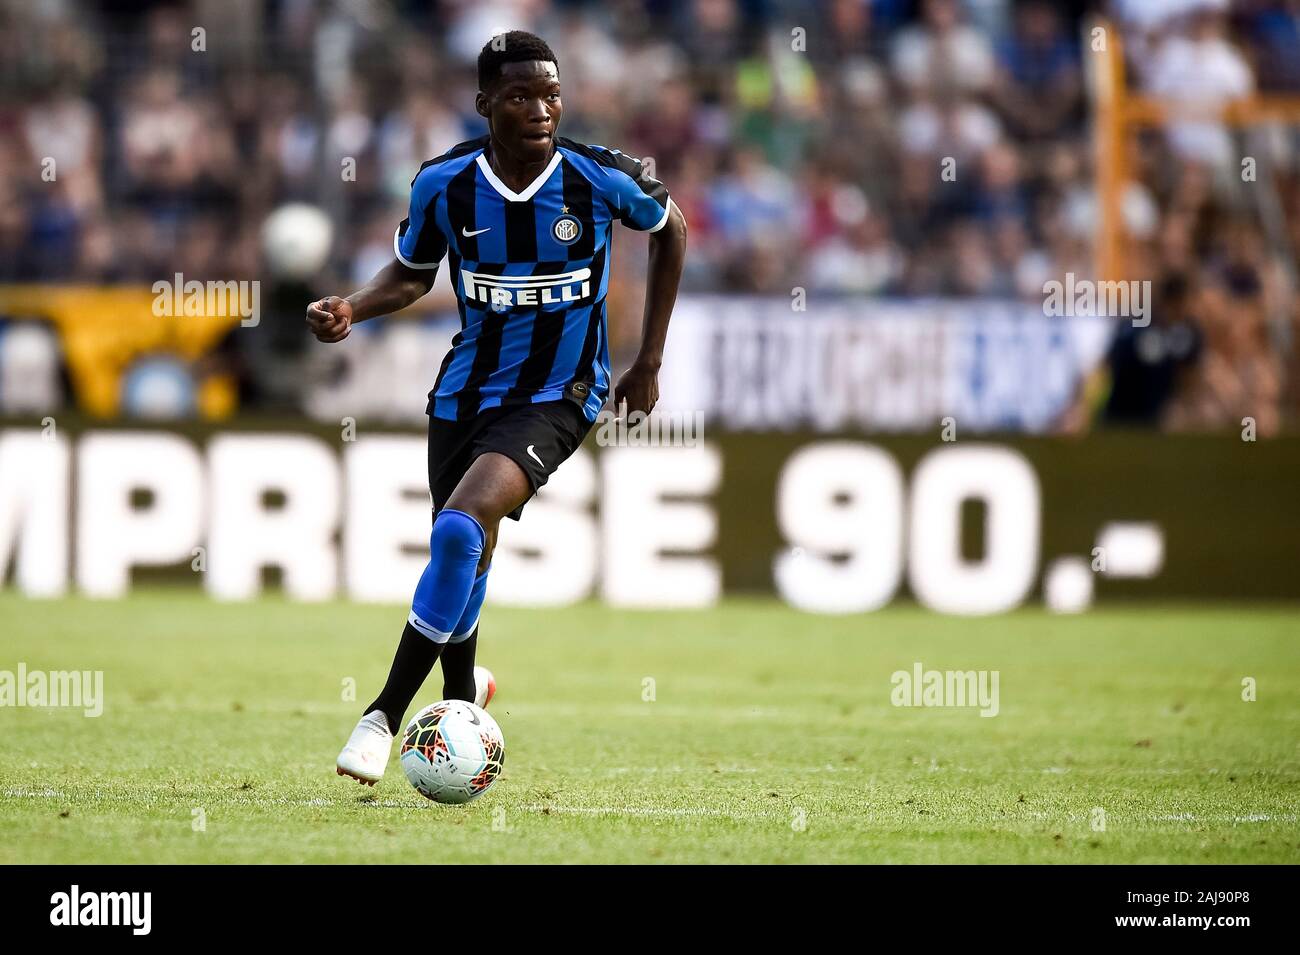 Lugano, Switzerland. 14 July, 2019: Lucien Agoume of FC Internazionale in action during pre-season friendly football match between FC Lugano and FC Internazionale. FC Internazionale won 2-1 over FC Lugano. Credit: Nicolò Campo/Alamy Live New Stock Photo